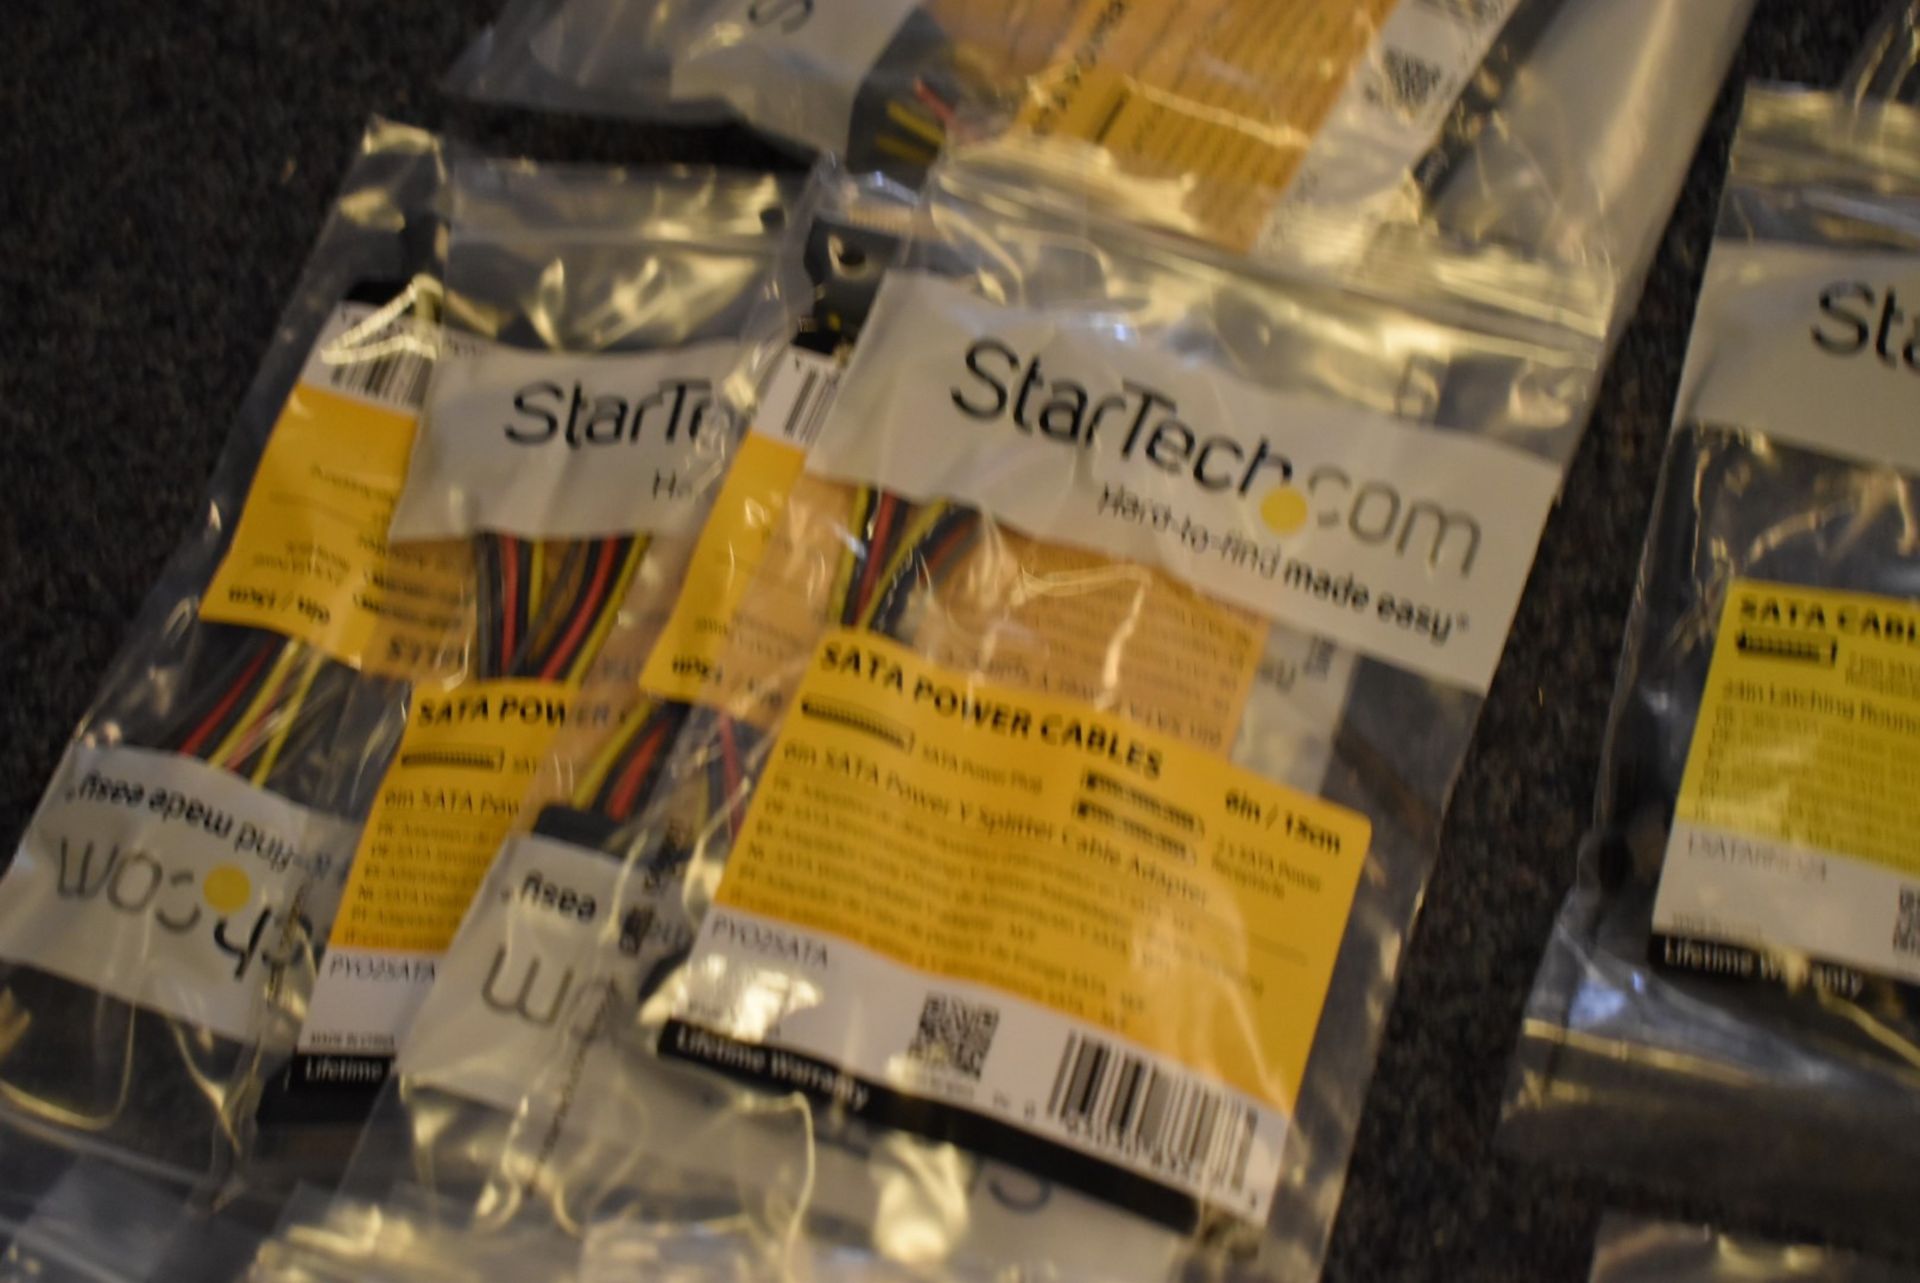 177 x Assorted StarTech Cables - Huge Lot in Original Packing - Various Cables Included - Image 43 of 50